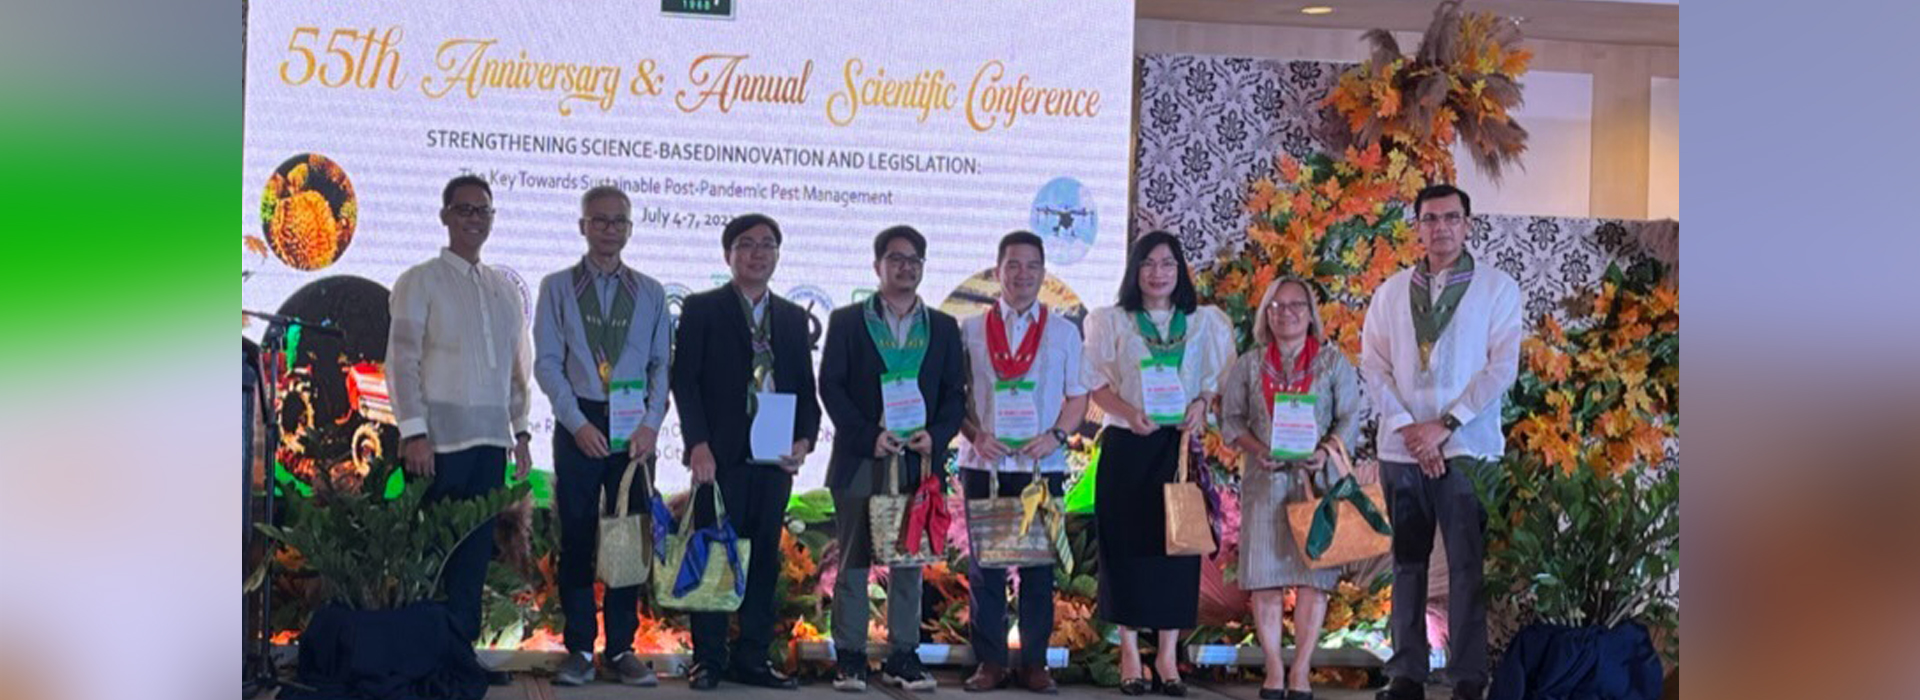 55th-anniversary-and-annual-scientific-conference-of-the-pest-management-council-of-the-philippines-pmcp20230802102830.jpg